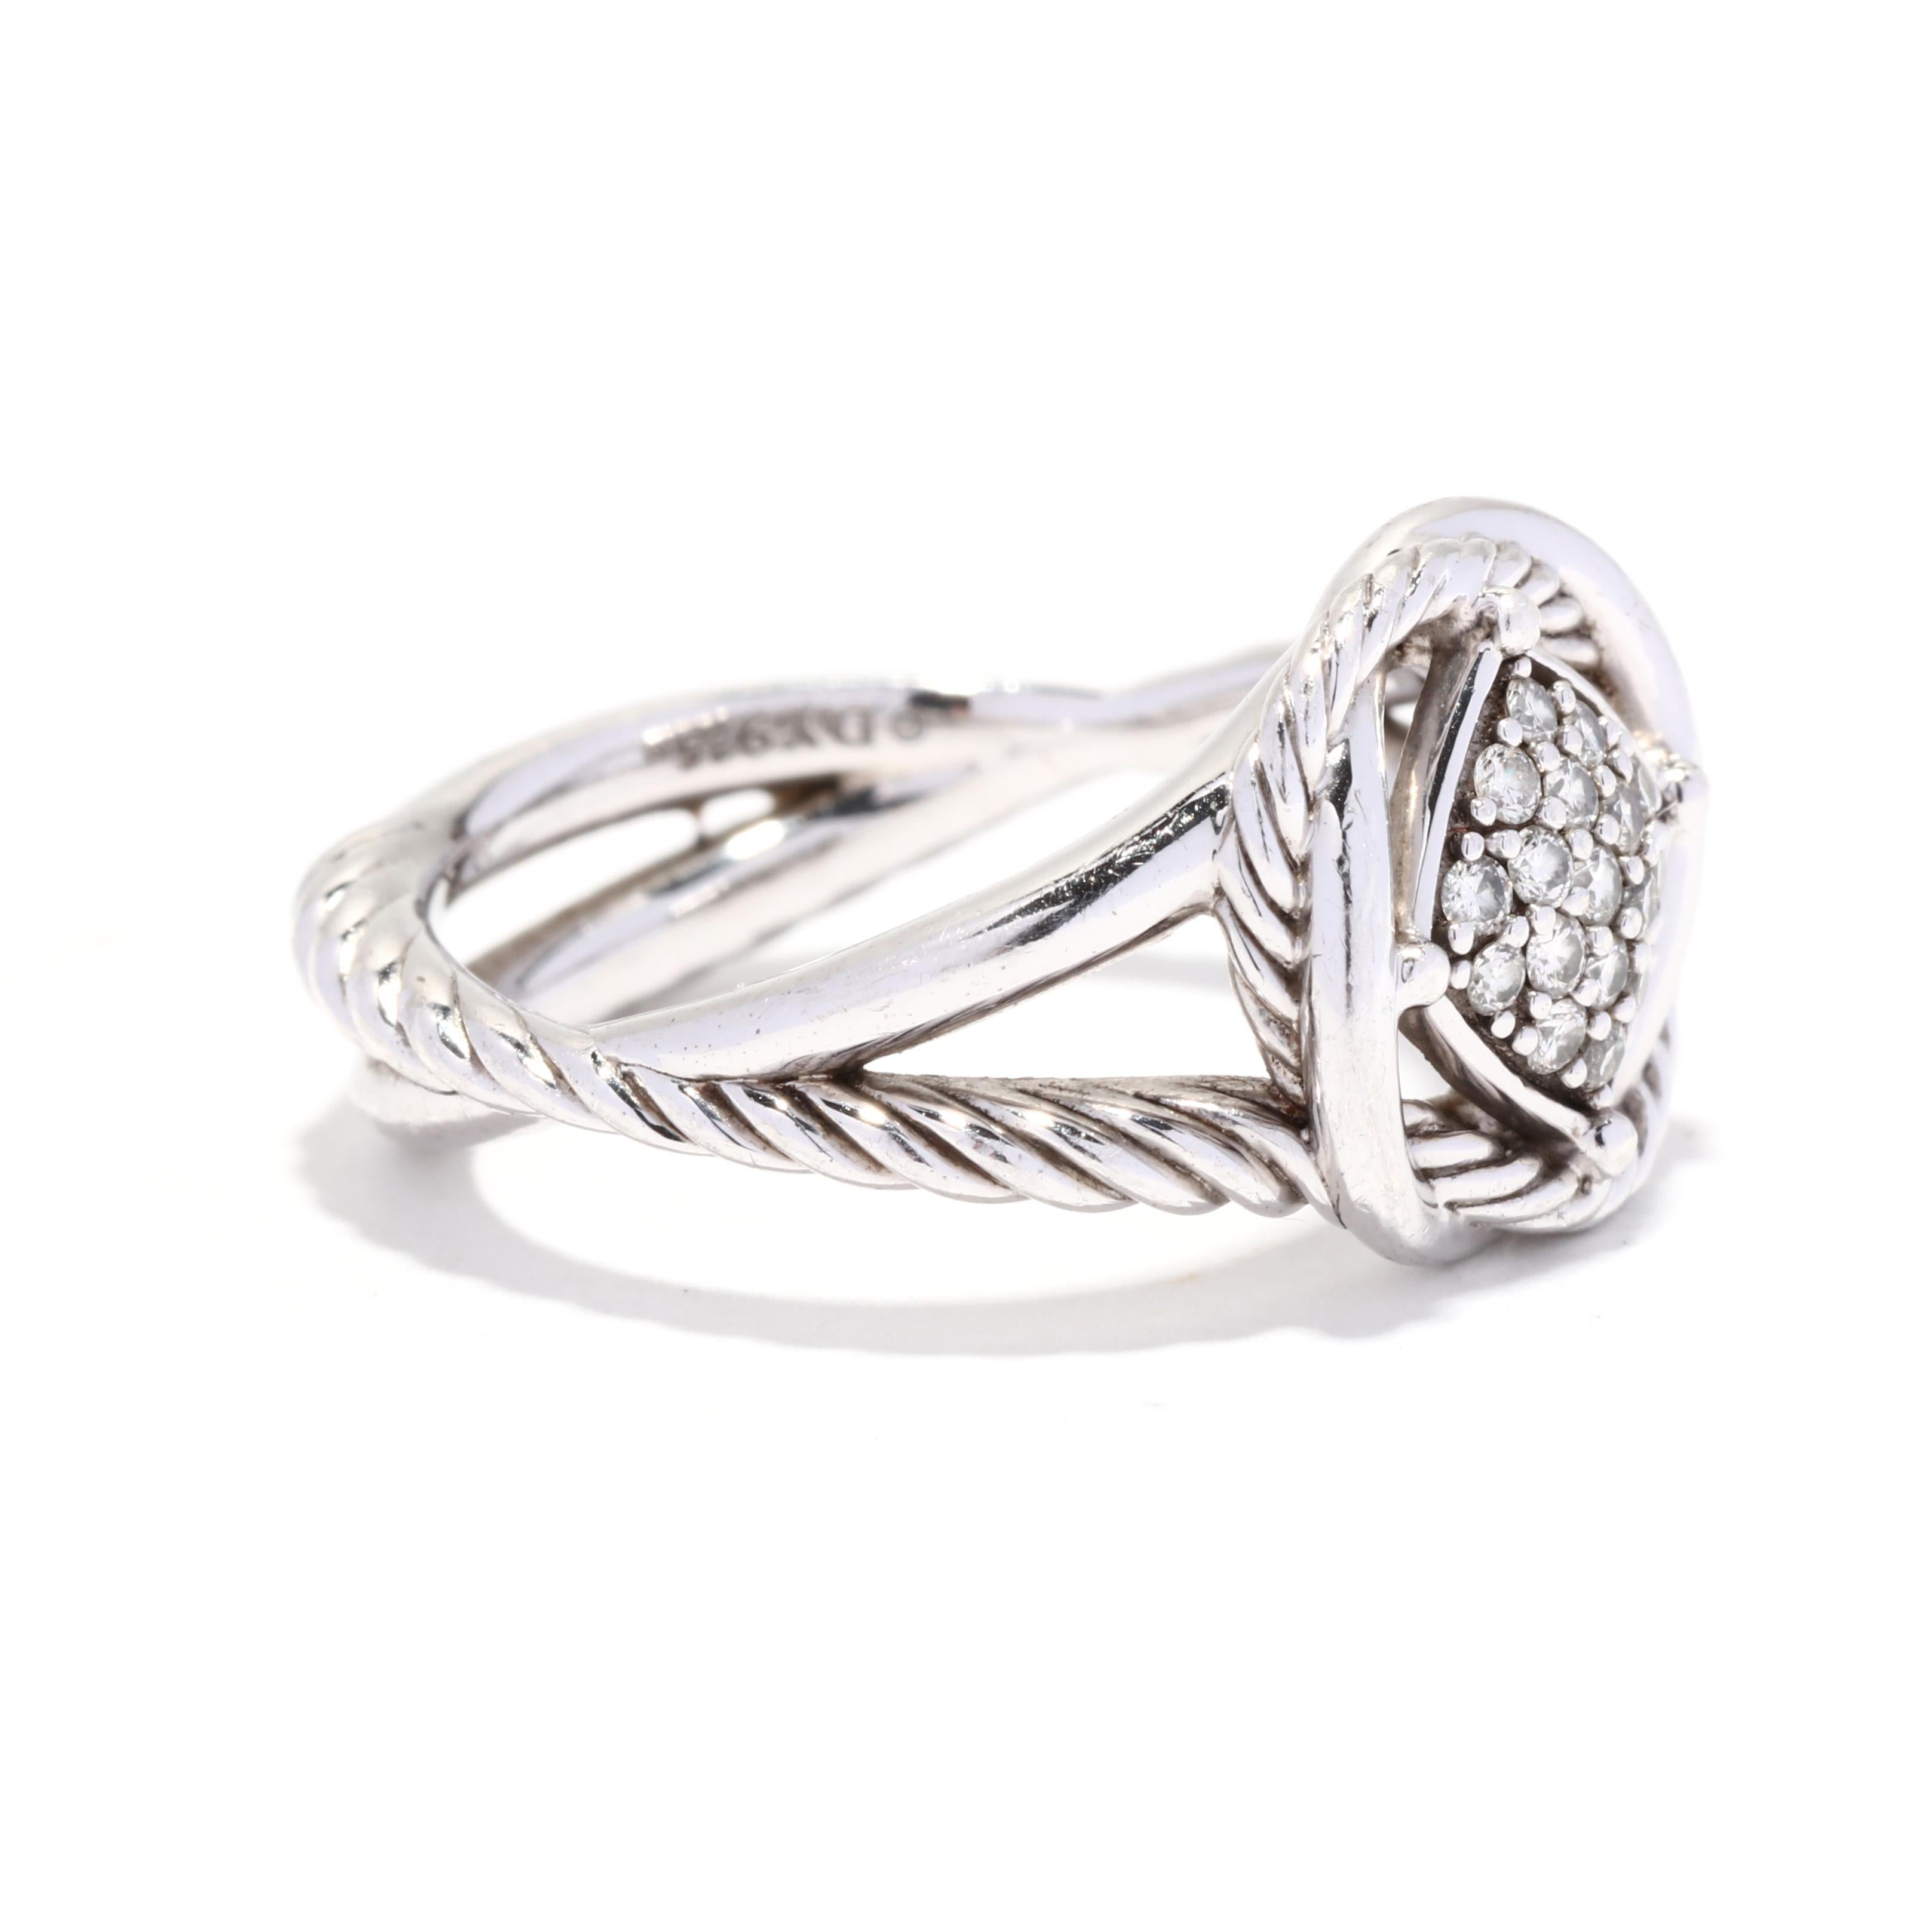 A David Yurman sterling silver and diamond Infinity ring. This everyday ring features a cushion en pointe center set with pavé diamonds weighing approximately .15 total carats with a twist surround and a split band with a polished and cable